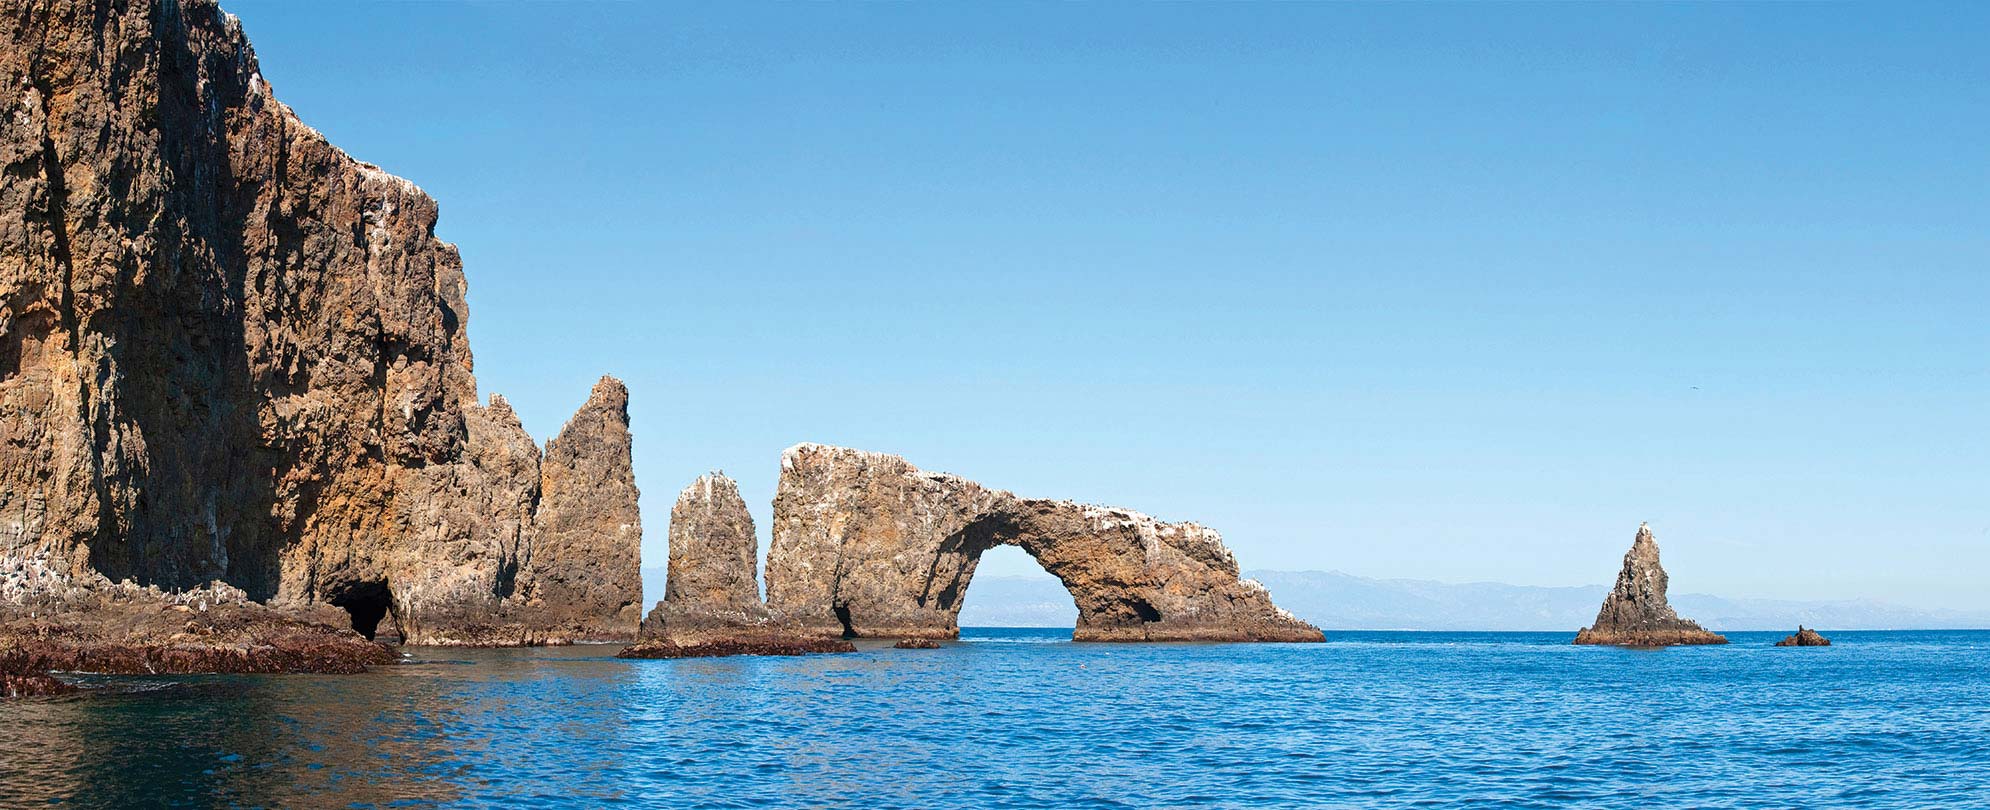 The Anacapa Arch Rock juts out of the water at Channel Islands National Park off the coast of California